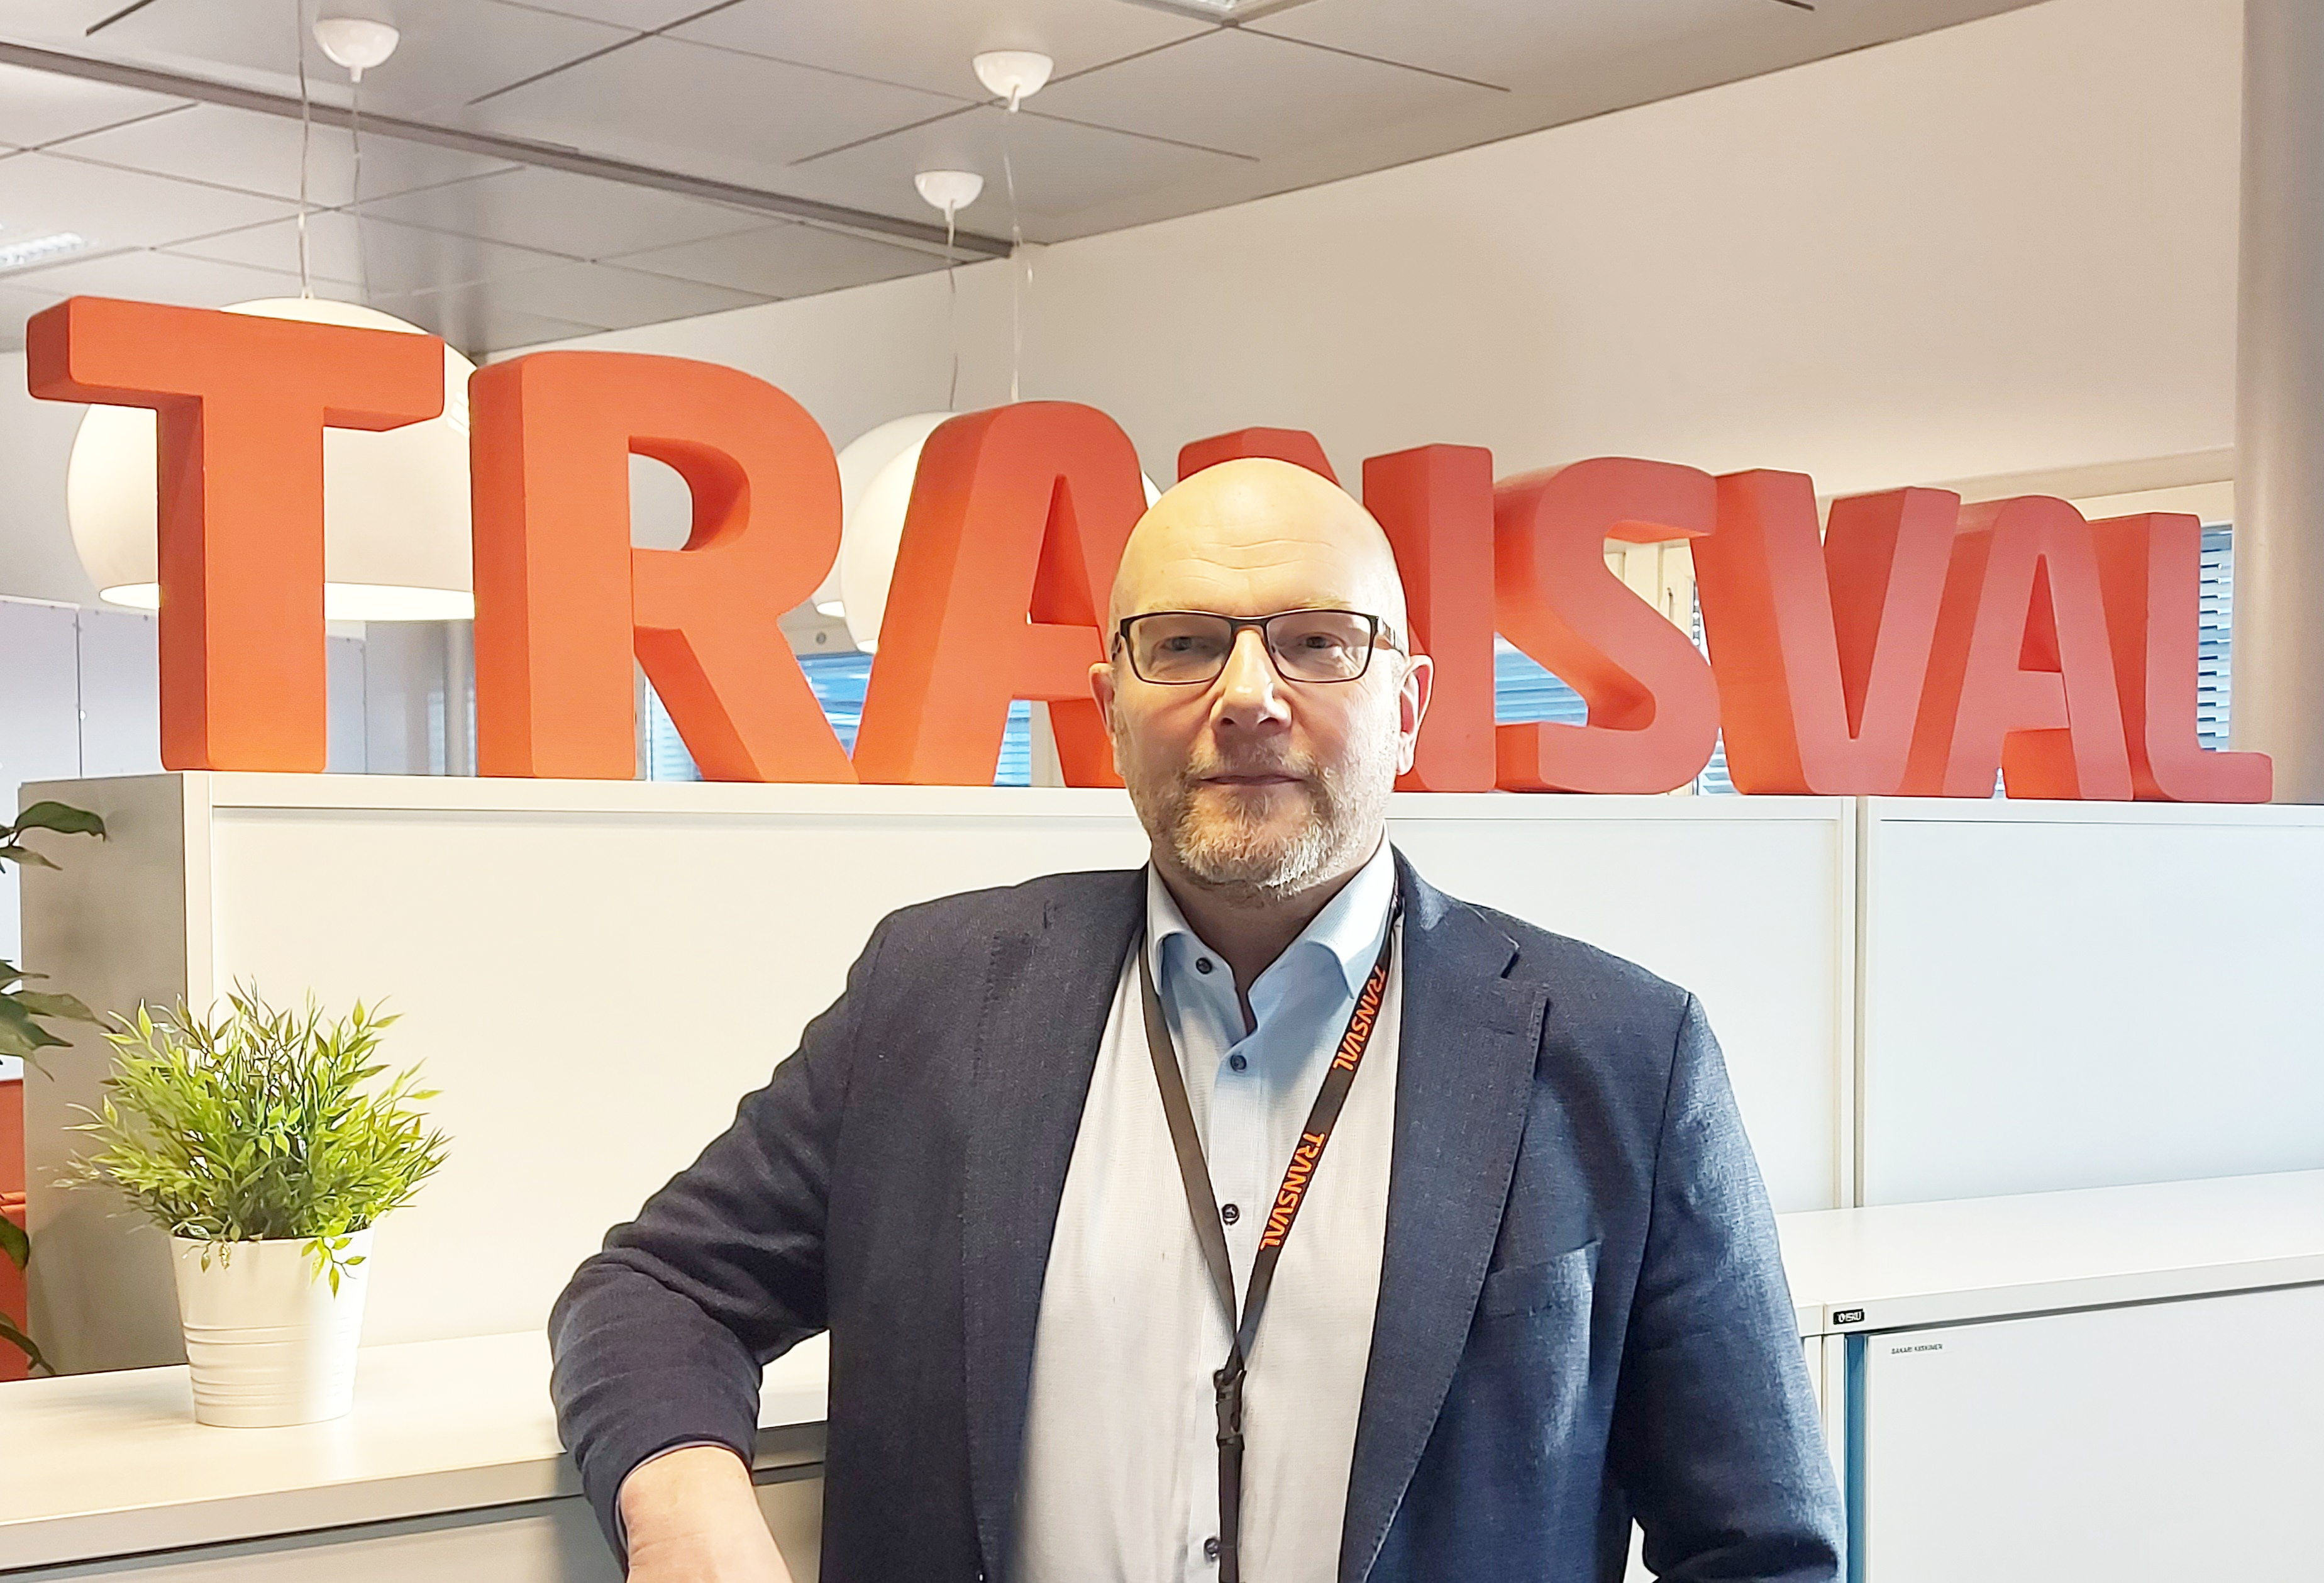 Our new Vice President of Sales Jari Immonen is experienced in logistics